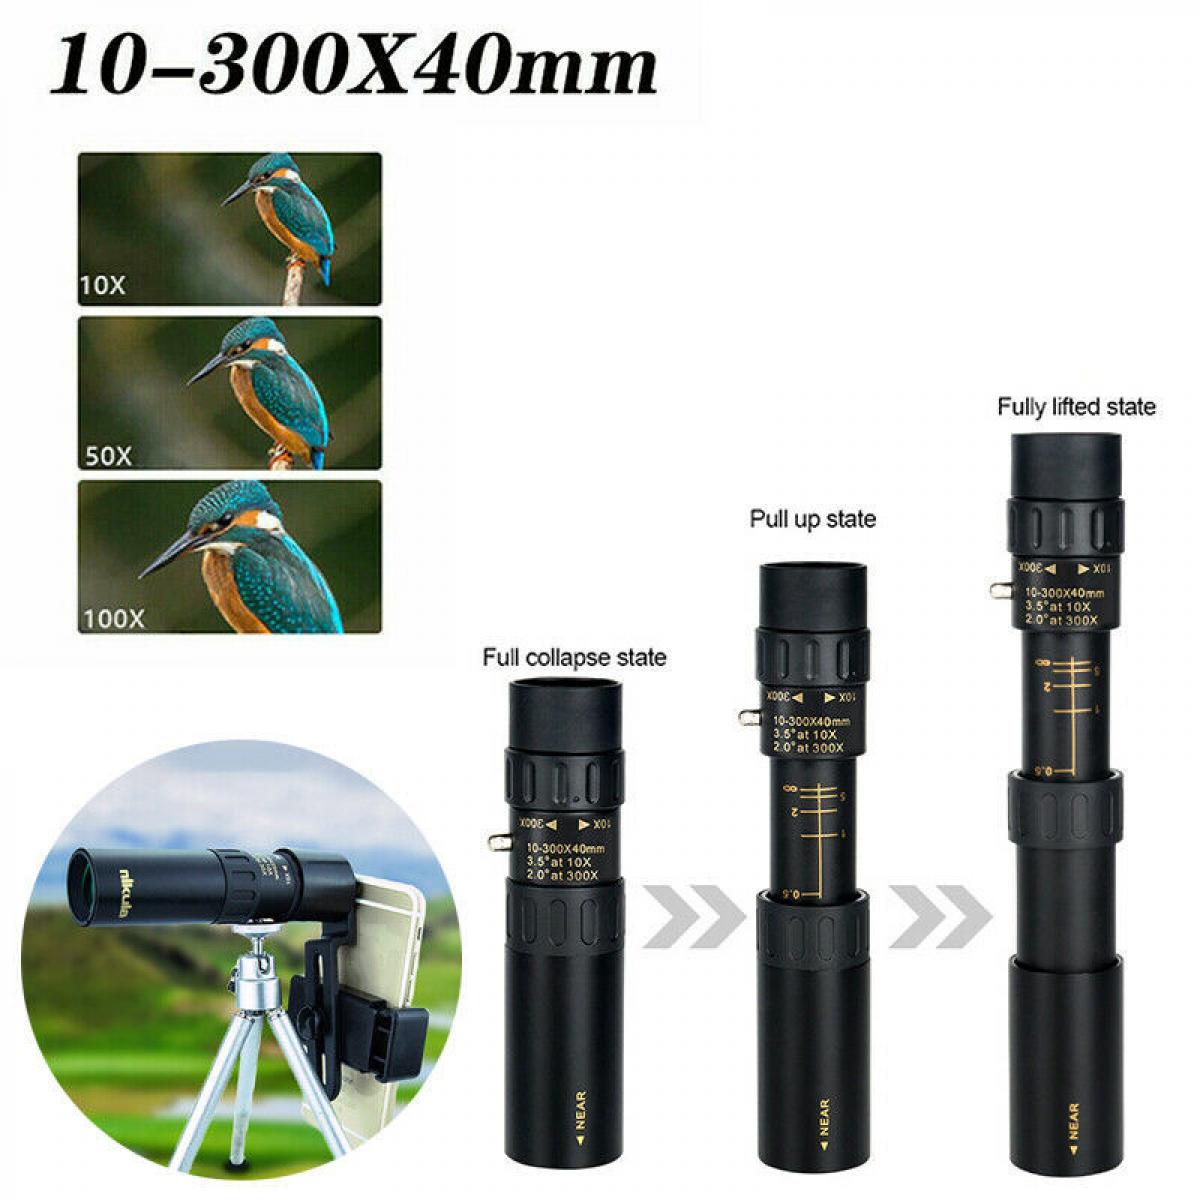 4K 10-300X40mm Super Telephoto Zoom Monocular Telescope with Tripod for Smartphone Portable Astronomy Beginners Waterproof Fogproof HD Night Vision Easy Focus for Travelling Camping A